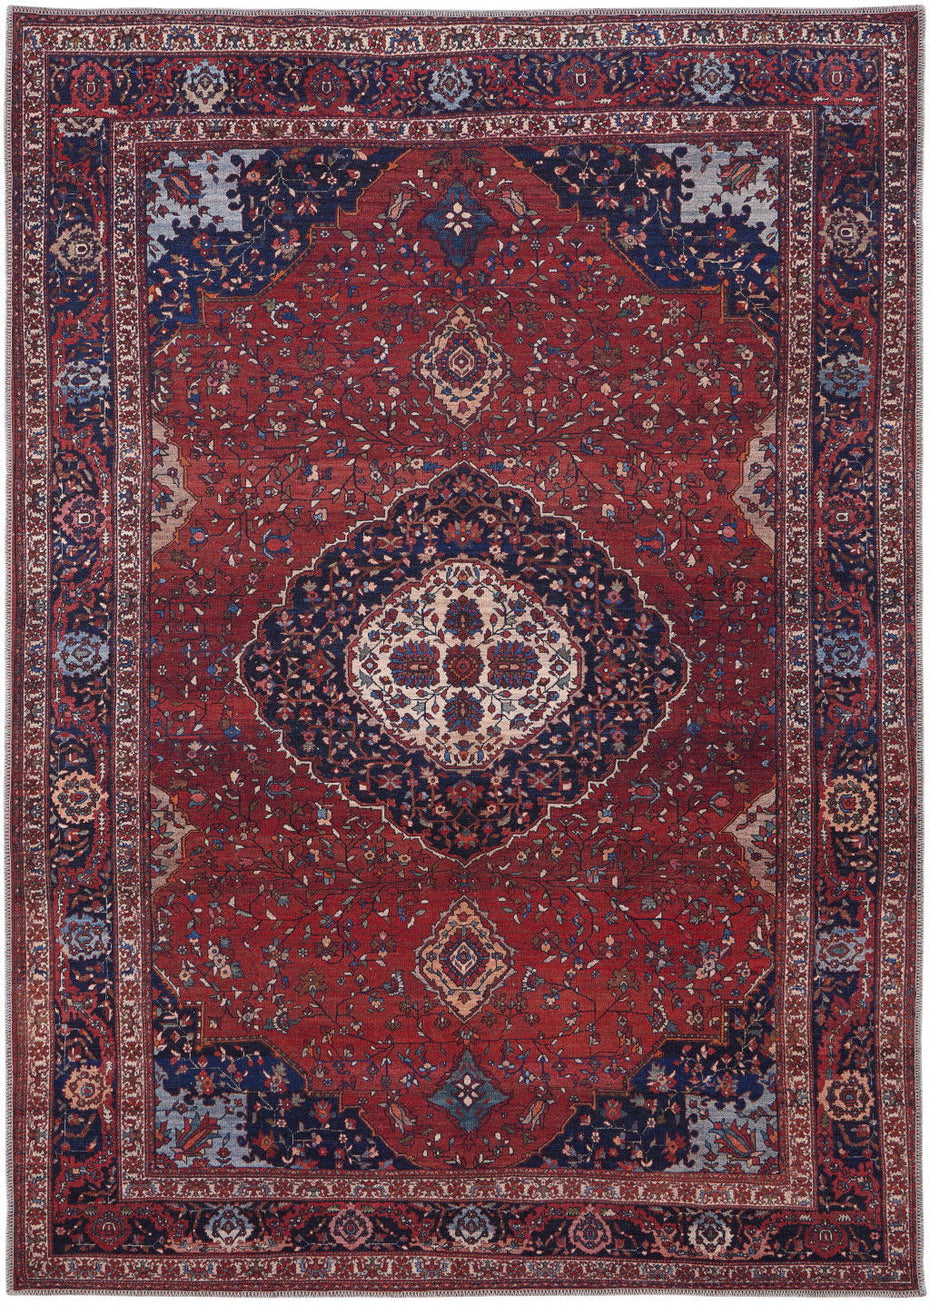 Floral Power Loom Area Rug - Red, Blue And Tan - 2' X 3'